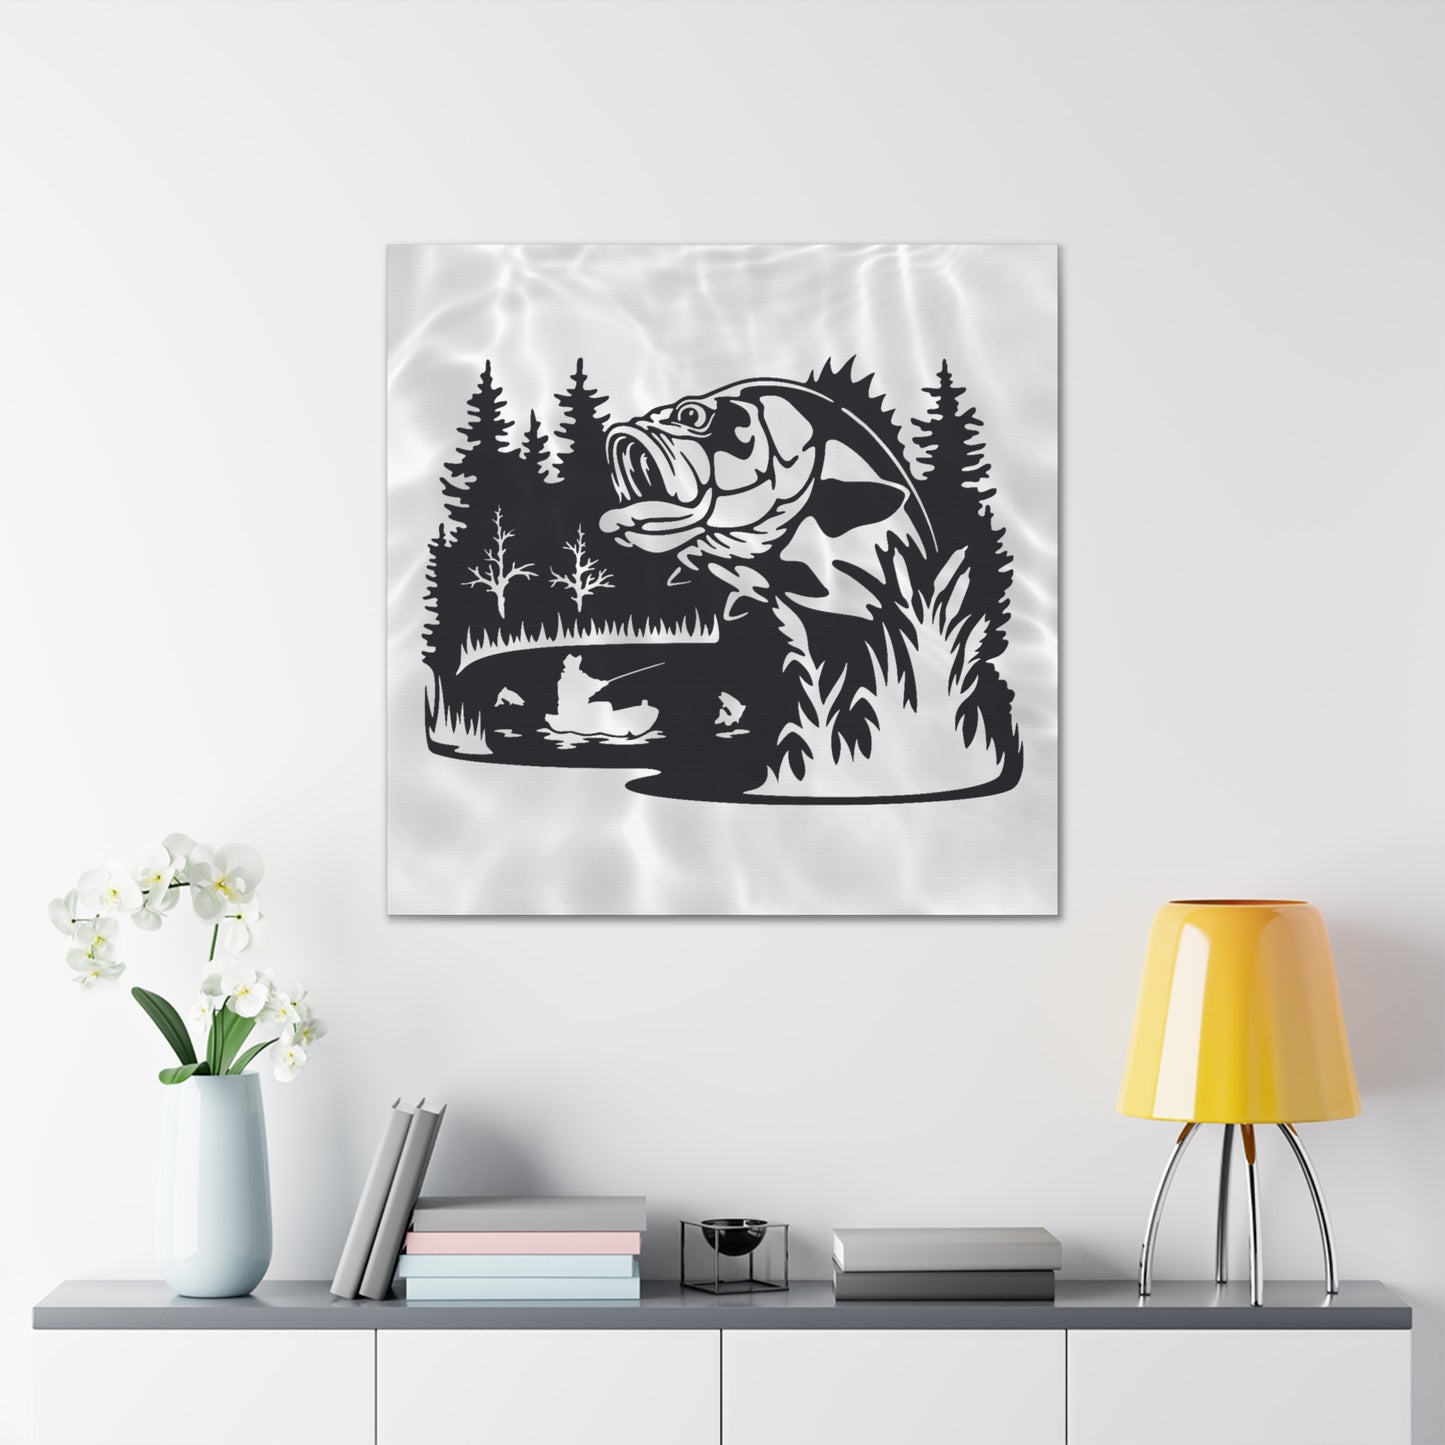 "Fishing" Wall Art - Weave Got Gifts - Unique Gifts You Won’t Find Anywhere Else!